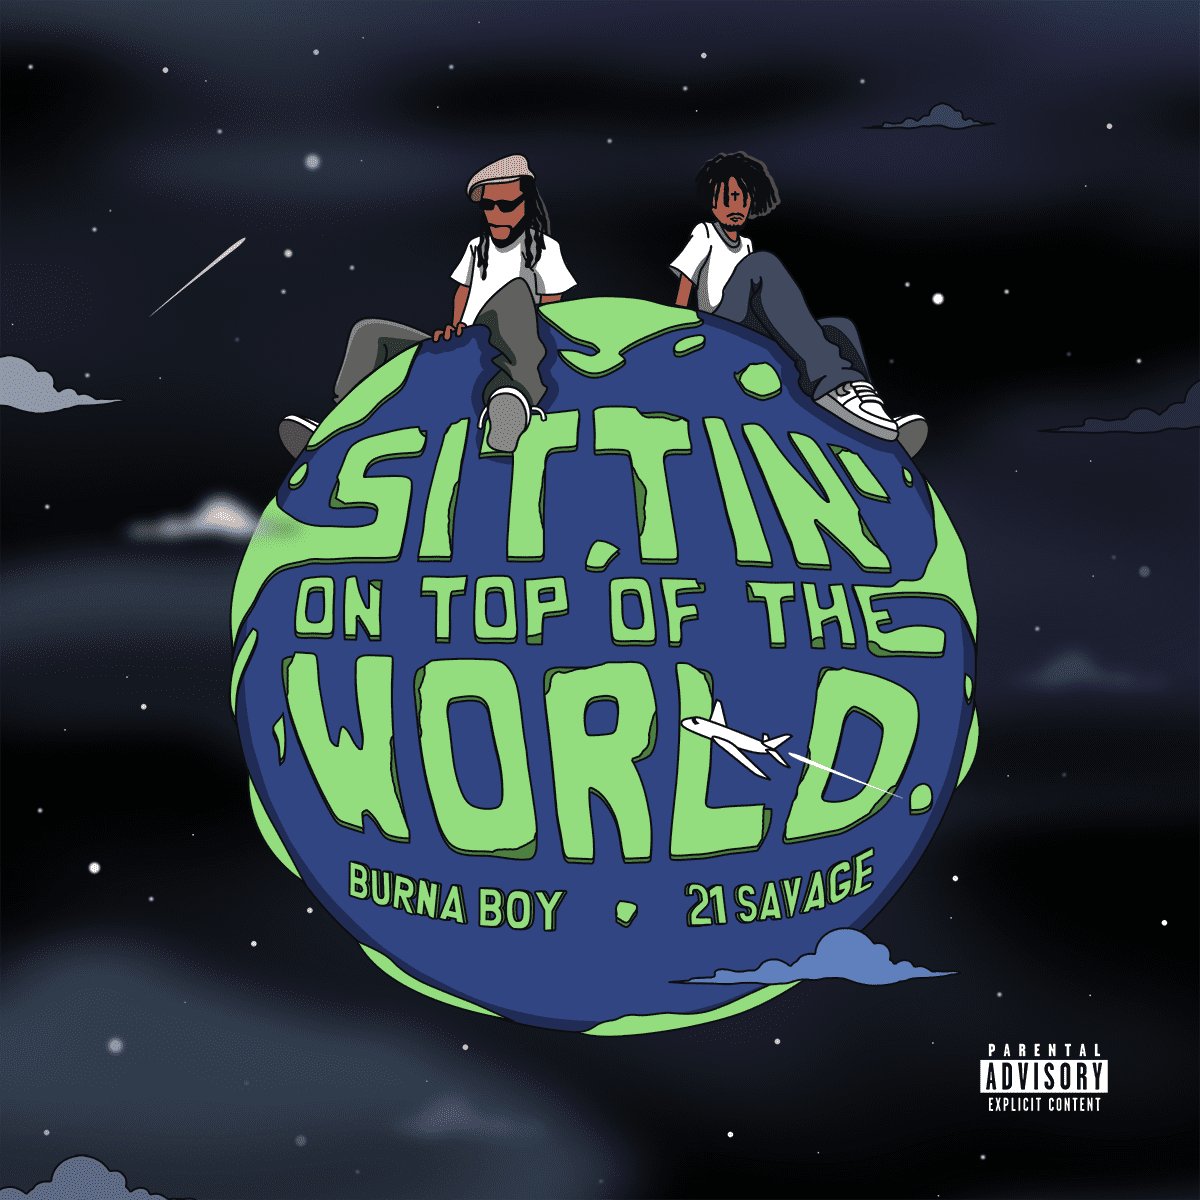 BURNA BOY MAKES HISTORY: WINS 4TH BEST INTERNATIONAL ACT AT BET AWARDS & DROPS INCREDIBLE MUSIC VIDEO "SITTING ON TOP OF THE WORLD" FT. 21 SAVAGE!